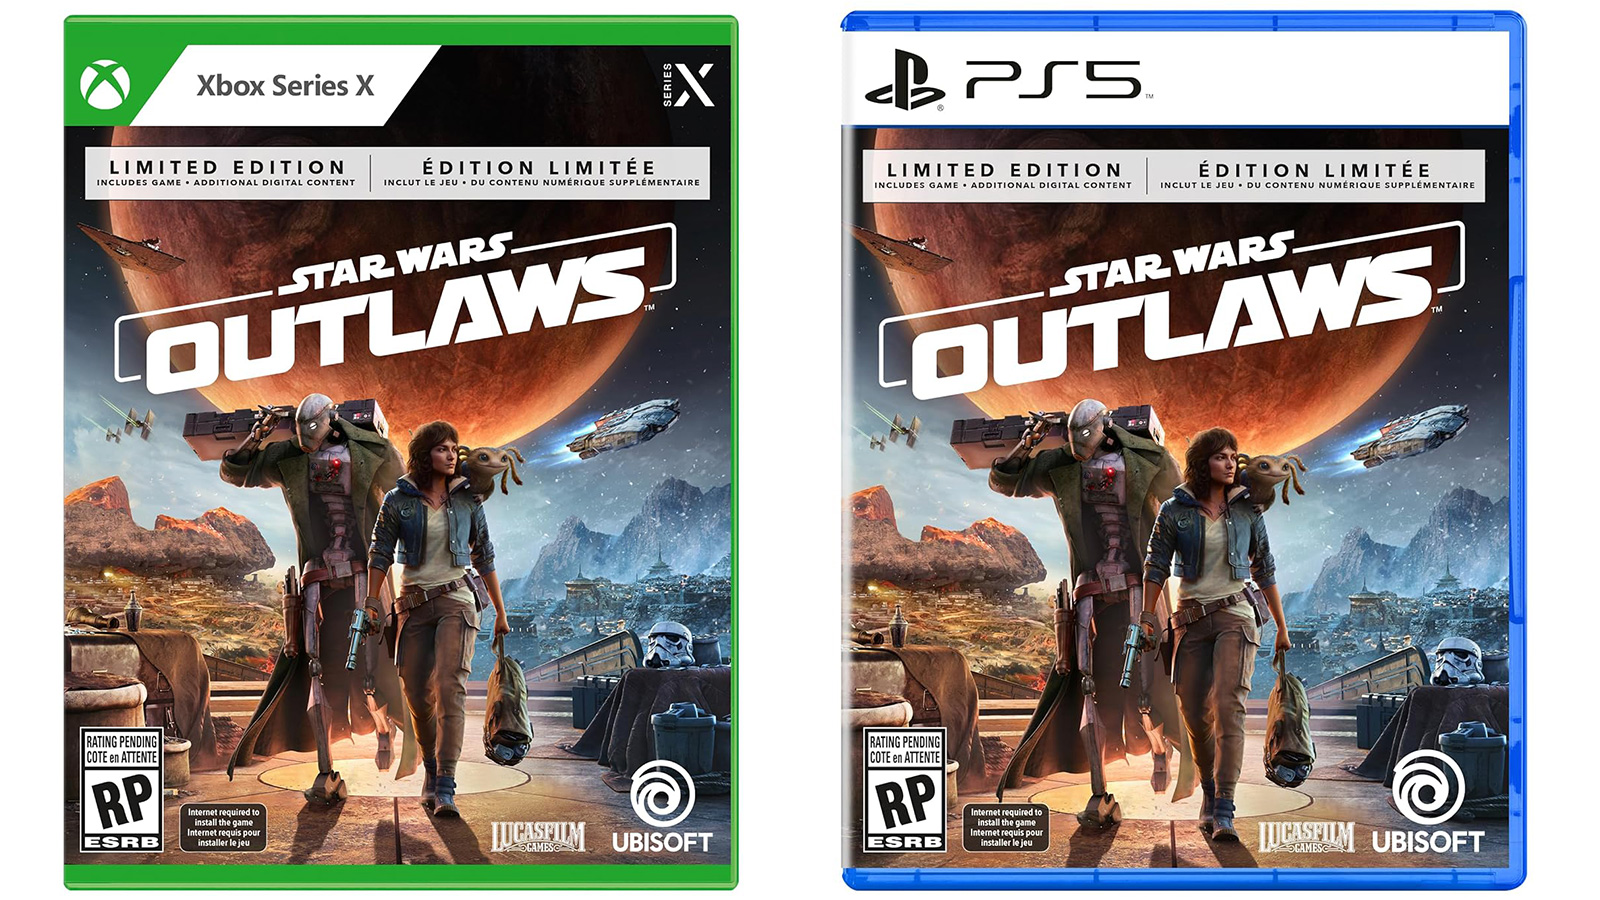 Available For Preorder At Amazon - Limited Edition Star Wars Outlaws Video Game